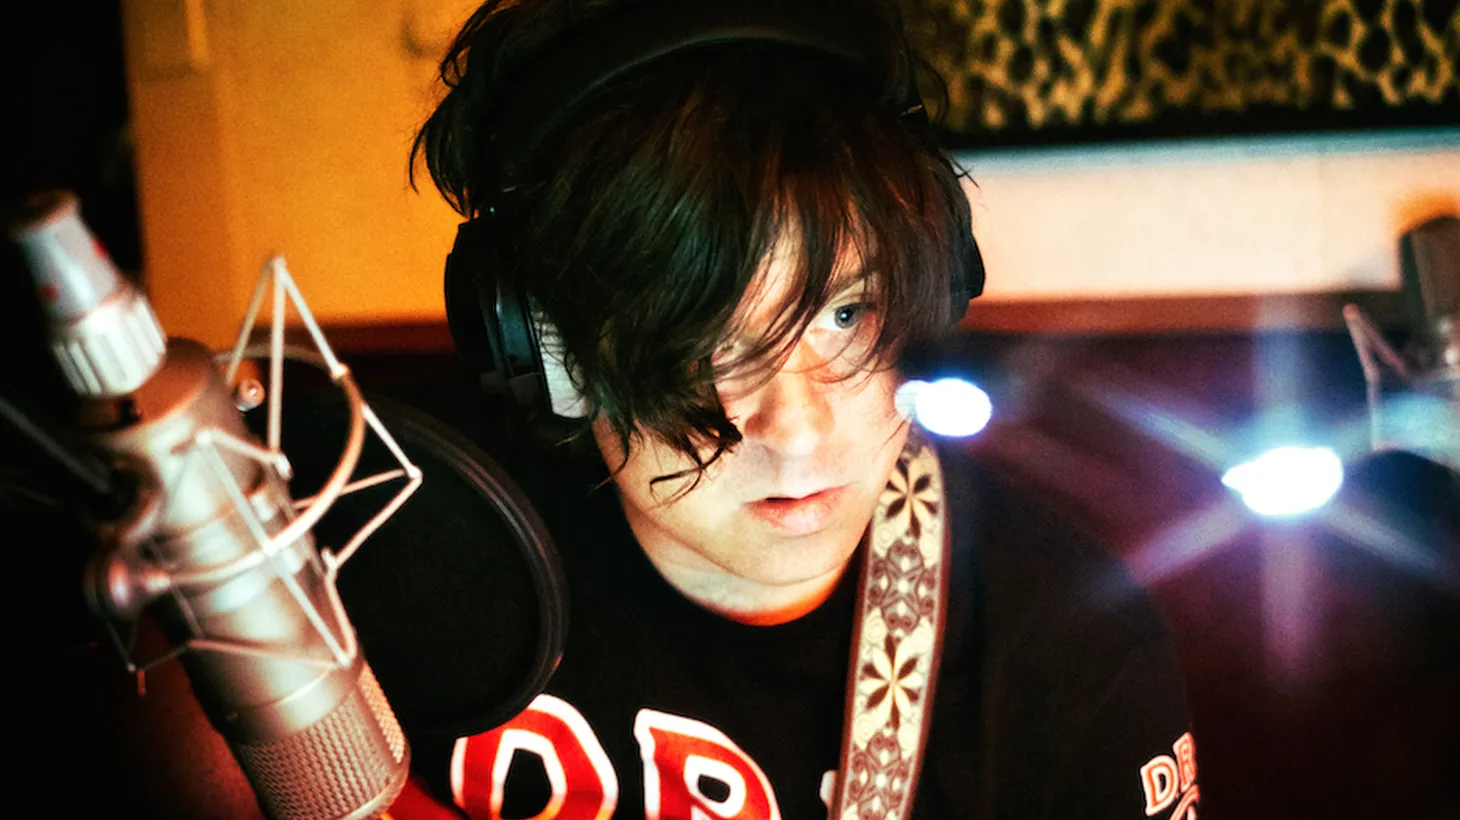 Ryan Adams' 14th studio album was recorded at his own Pax AM studios here in LA. The self-titled work is heartland rock at its finest, with Ryan’s special flare.